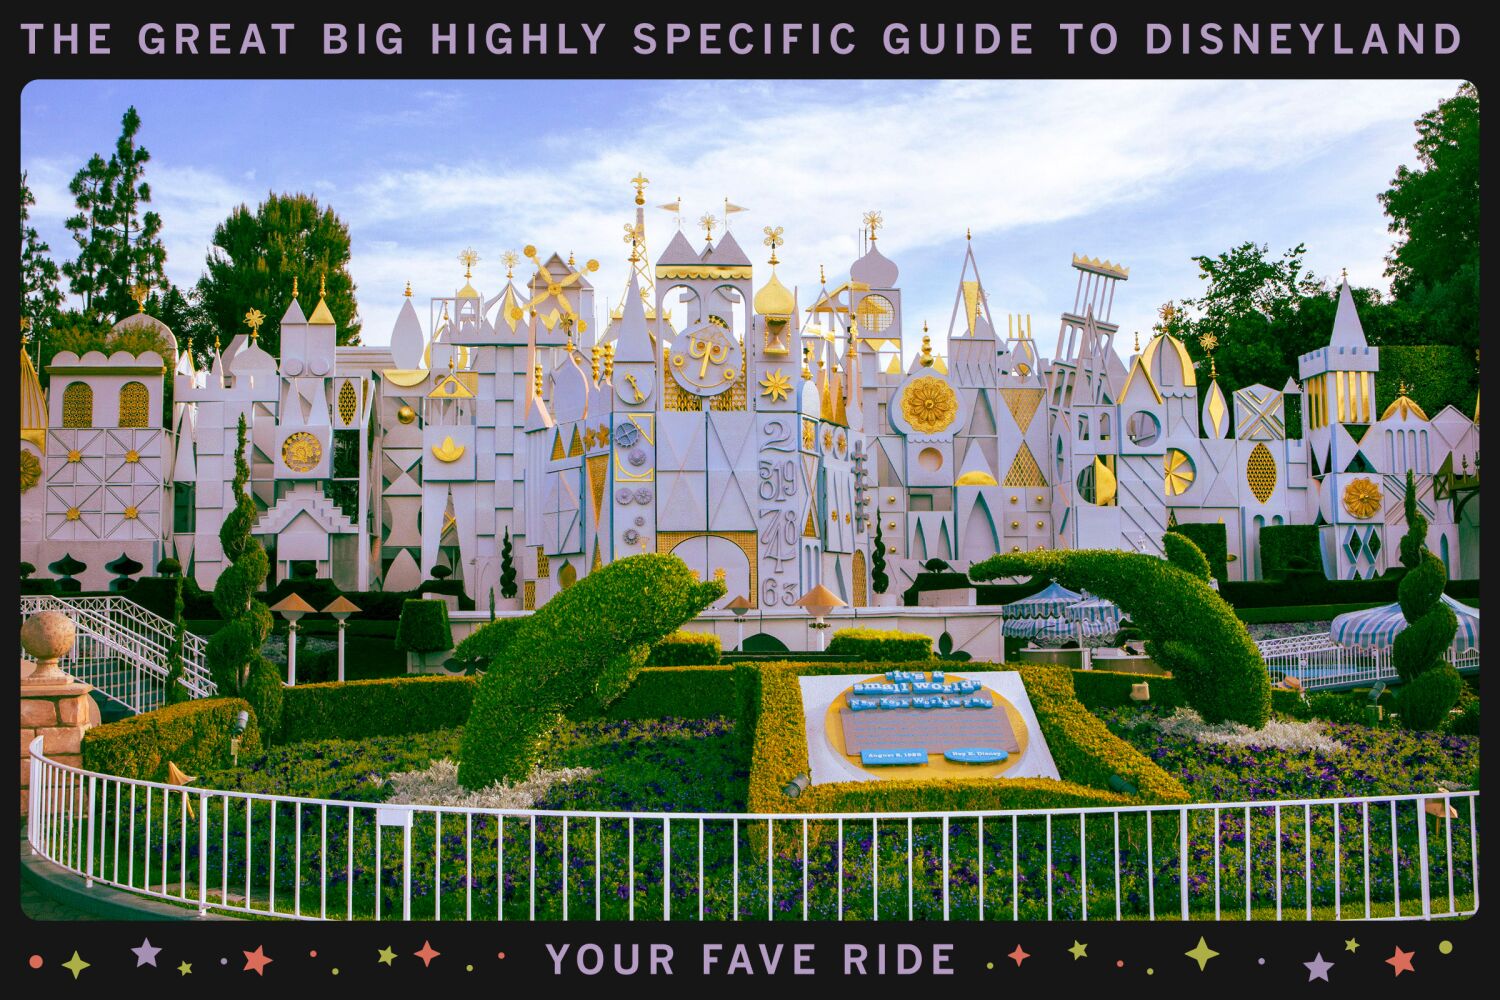 If It's a Small World isn't the best ride at Disneyland, what is? You tell us